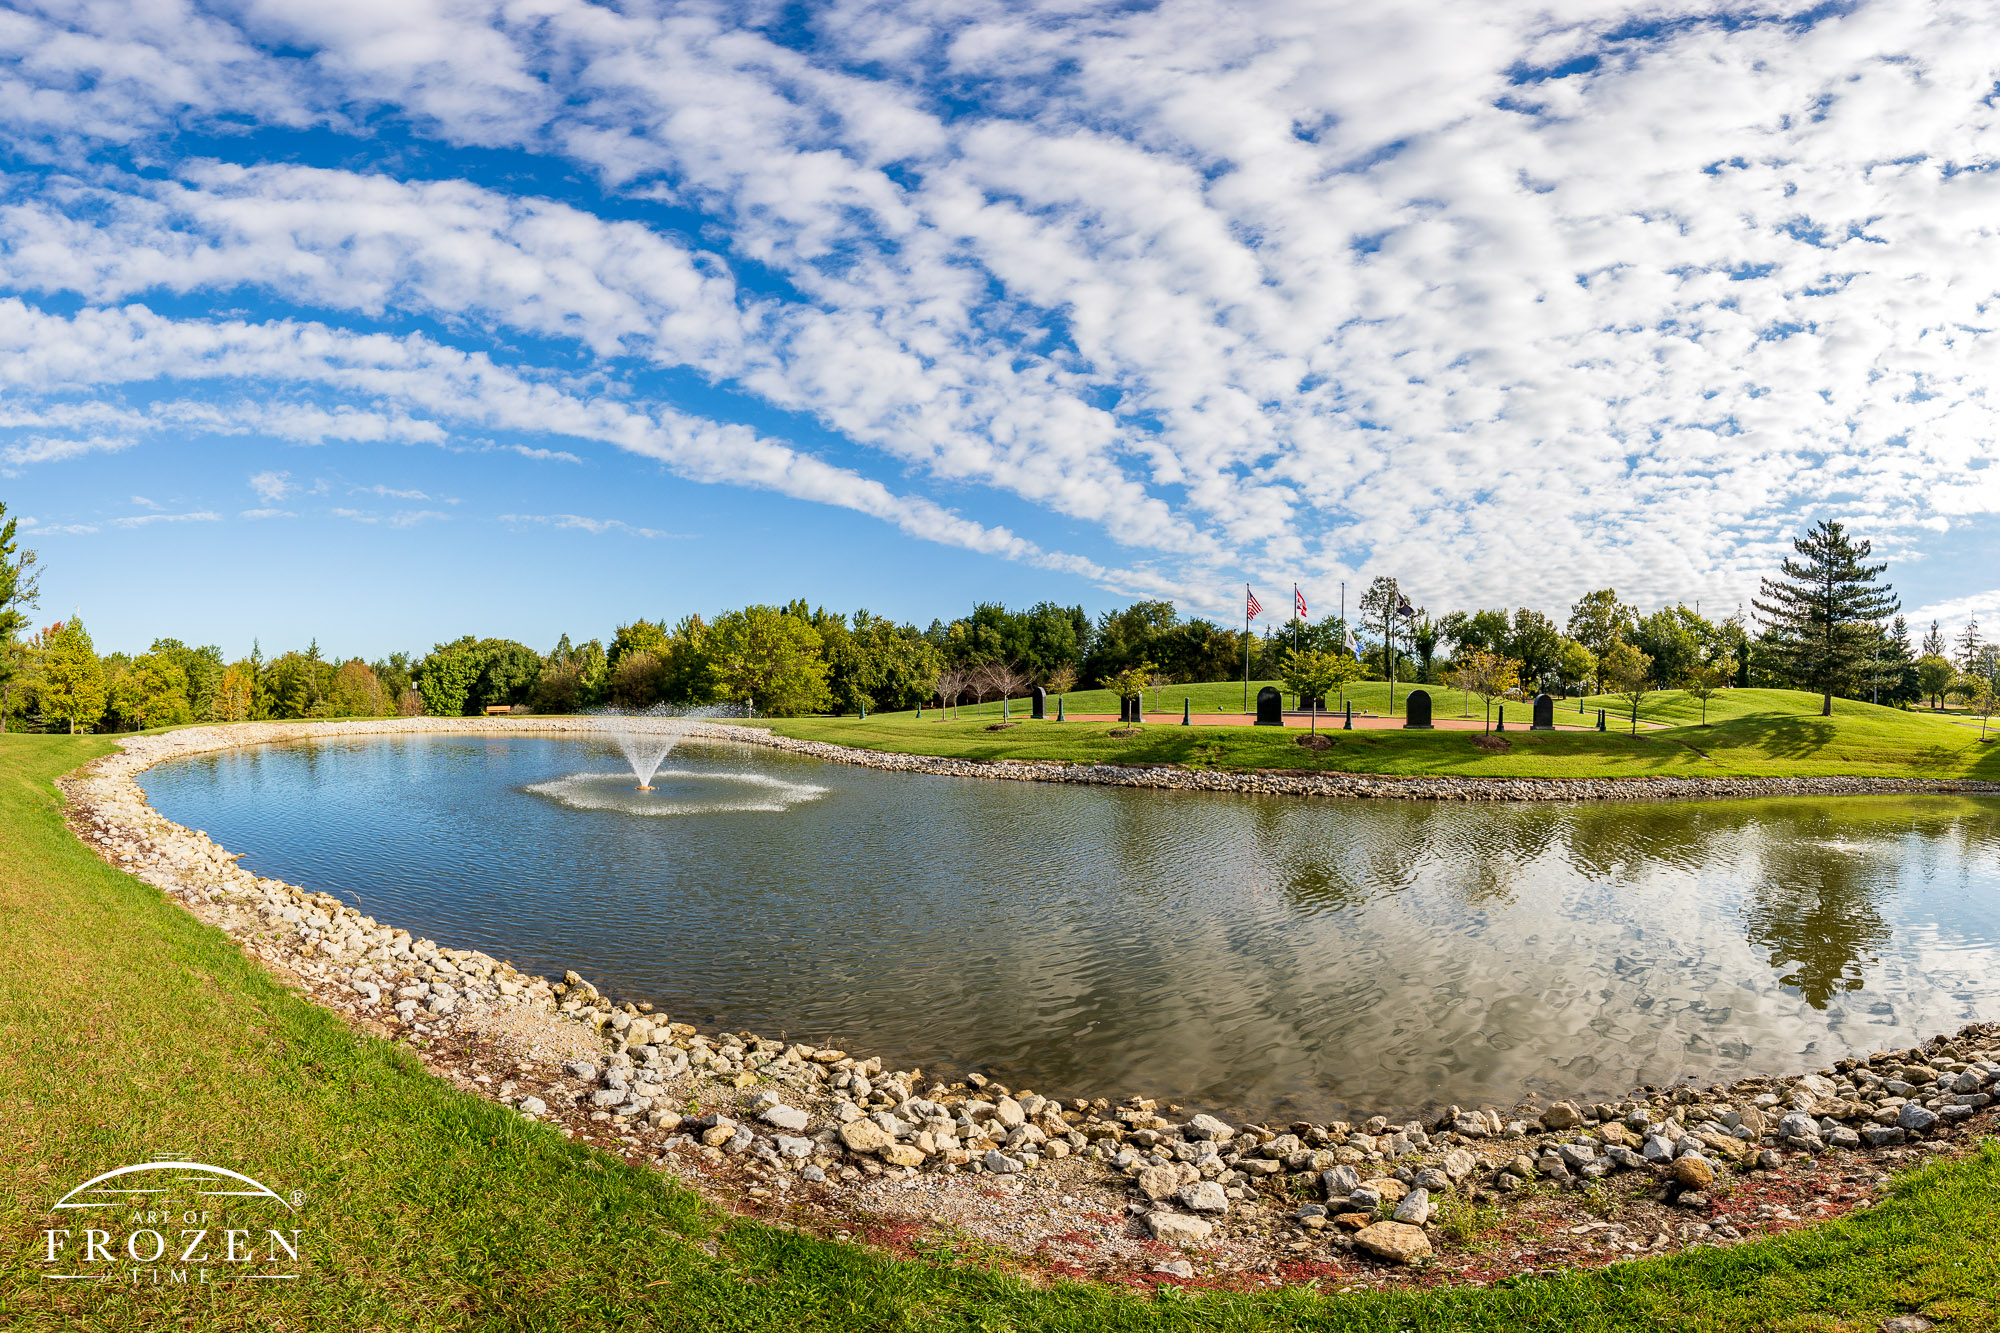 A wide-angle view of the fountain and pond at Stubb Park as band of clouds stretch across the blue sky